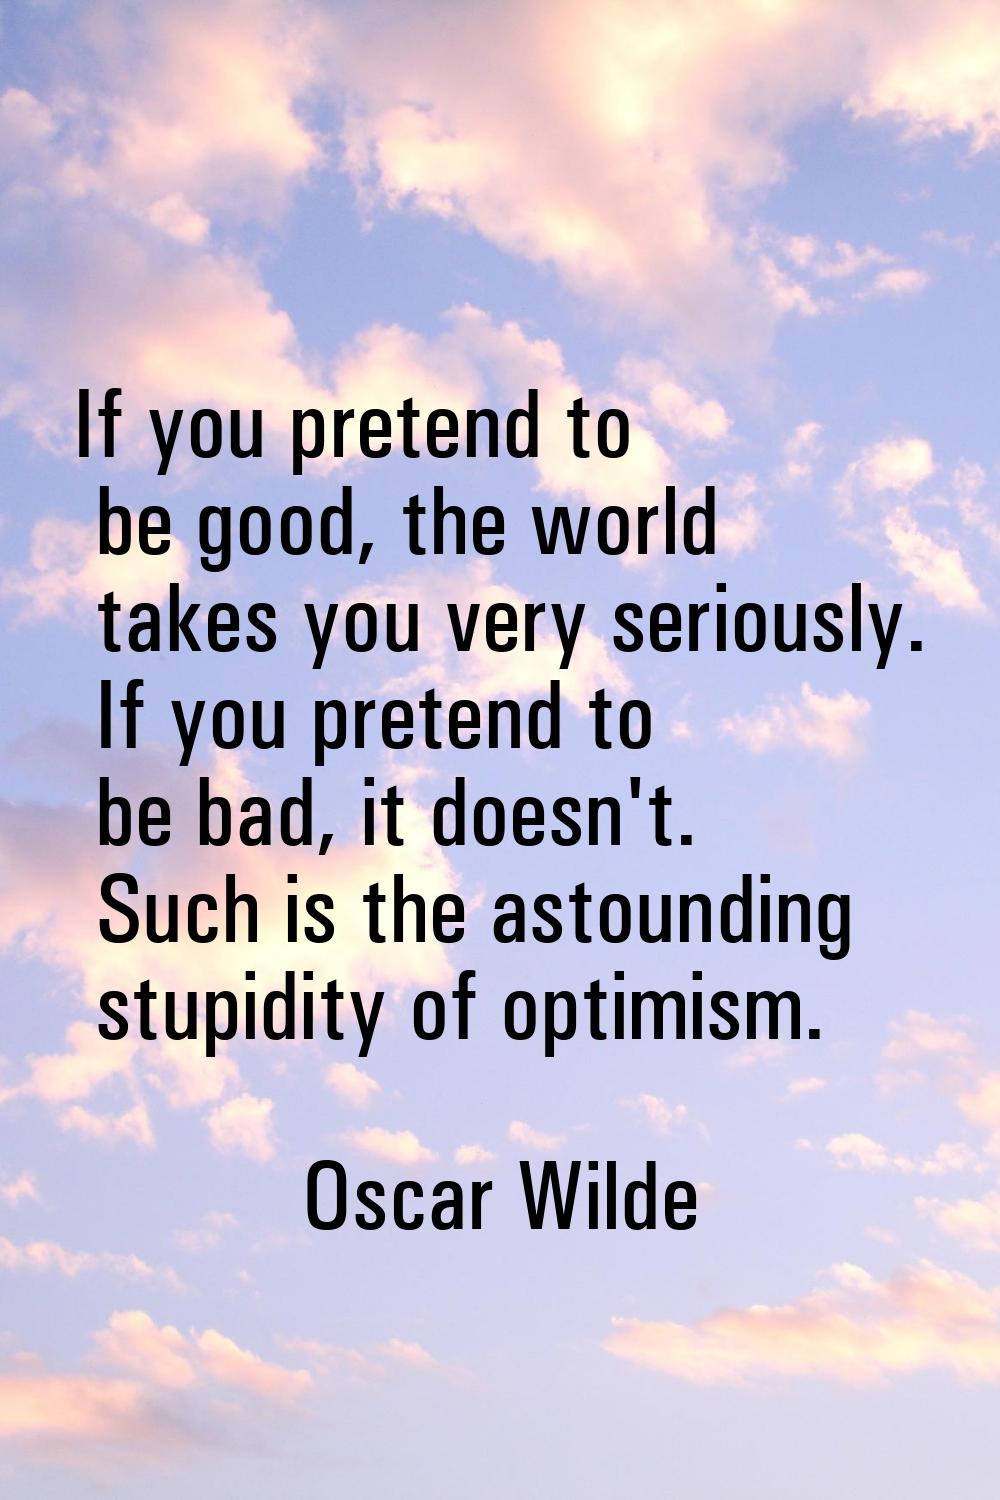 If you pretend to be good, the world takes you very seriously. If you pretend to be bad, it doesn't